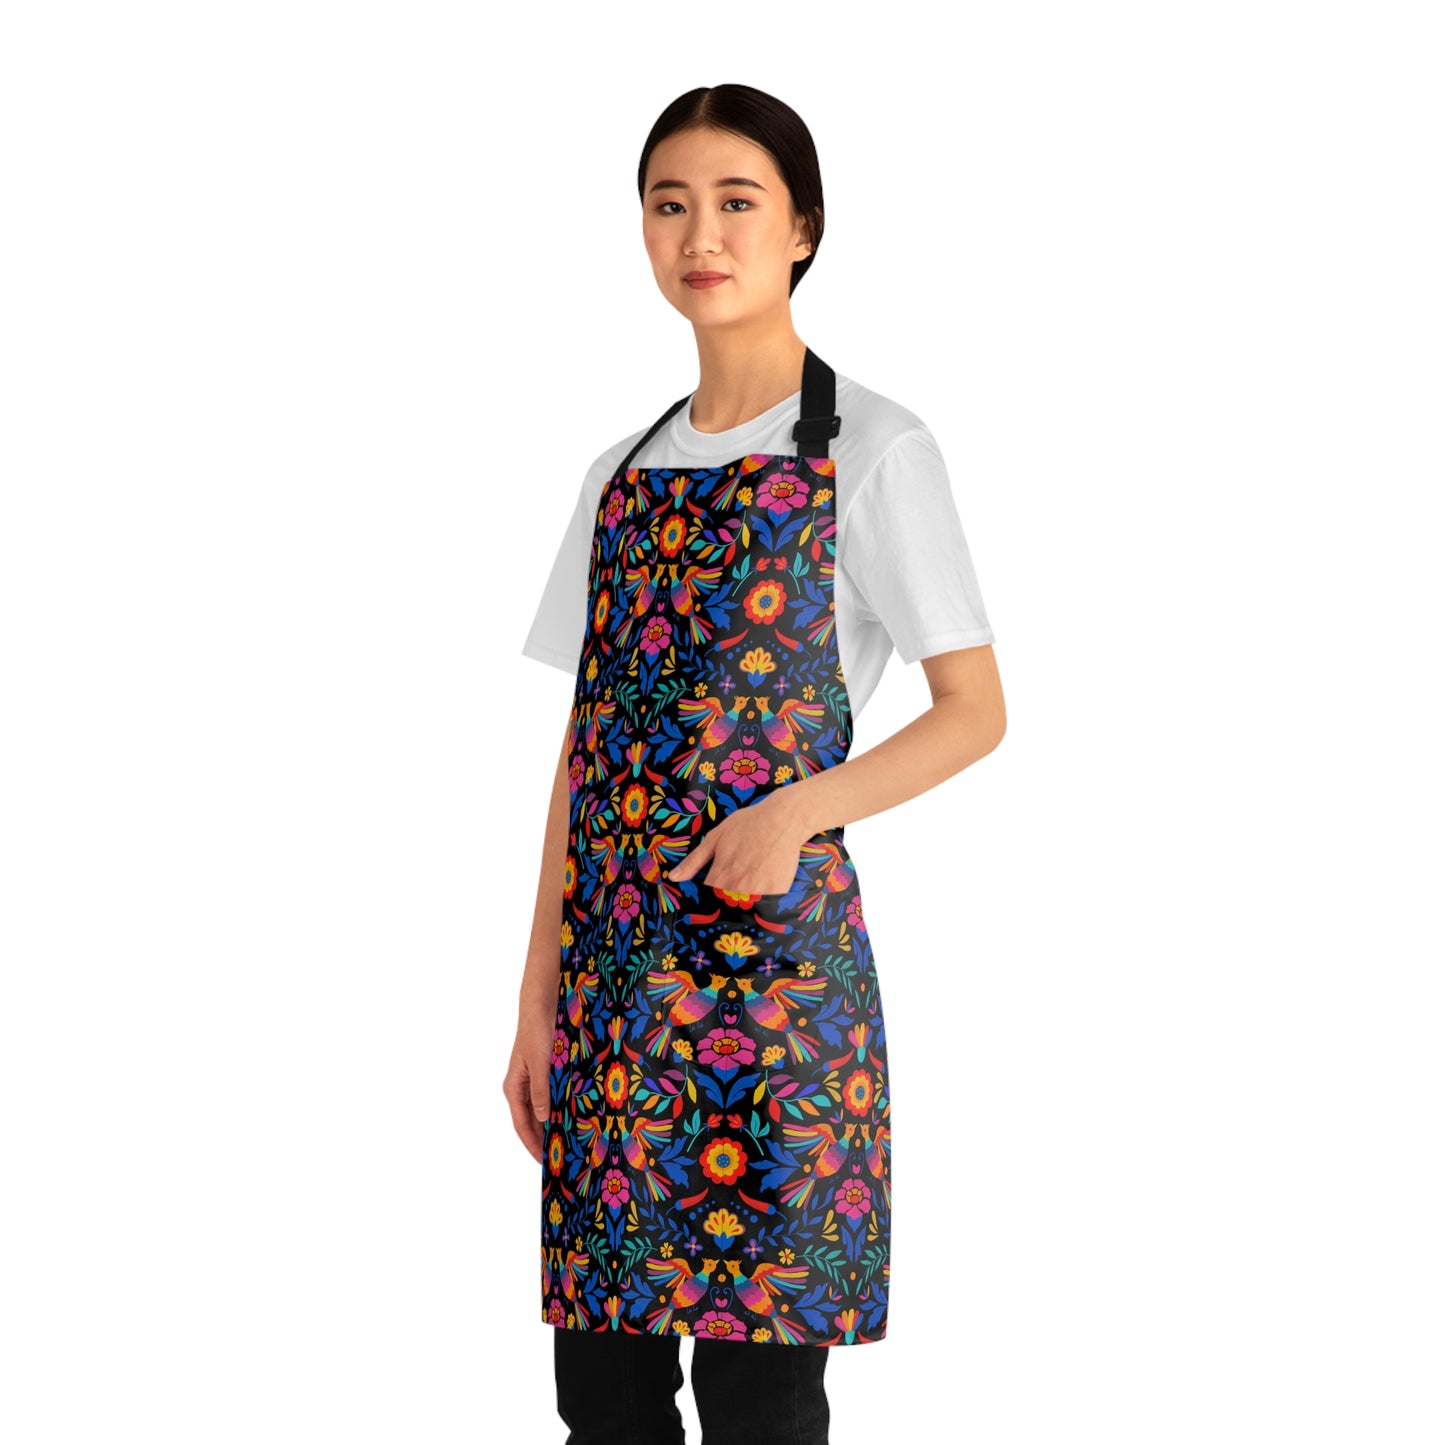 Otomi mandil. Otomi Apron for Mexican mom or Mexican dad. Mothers Day gift for Mexican wife.